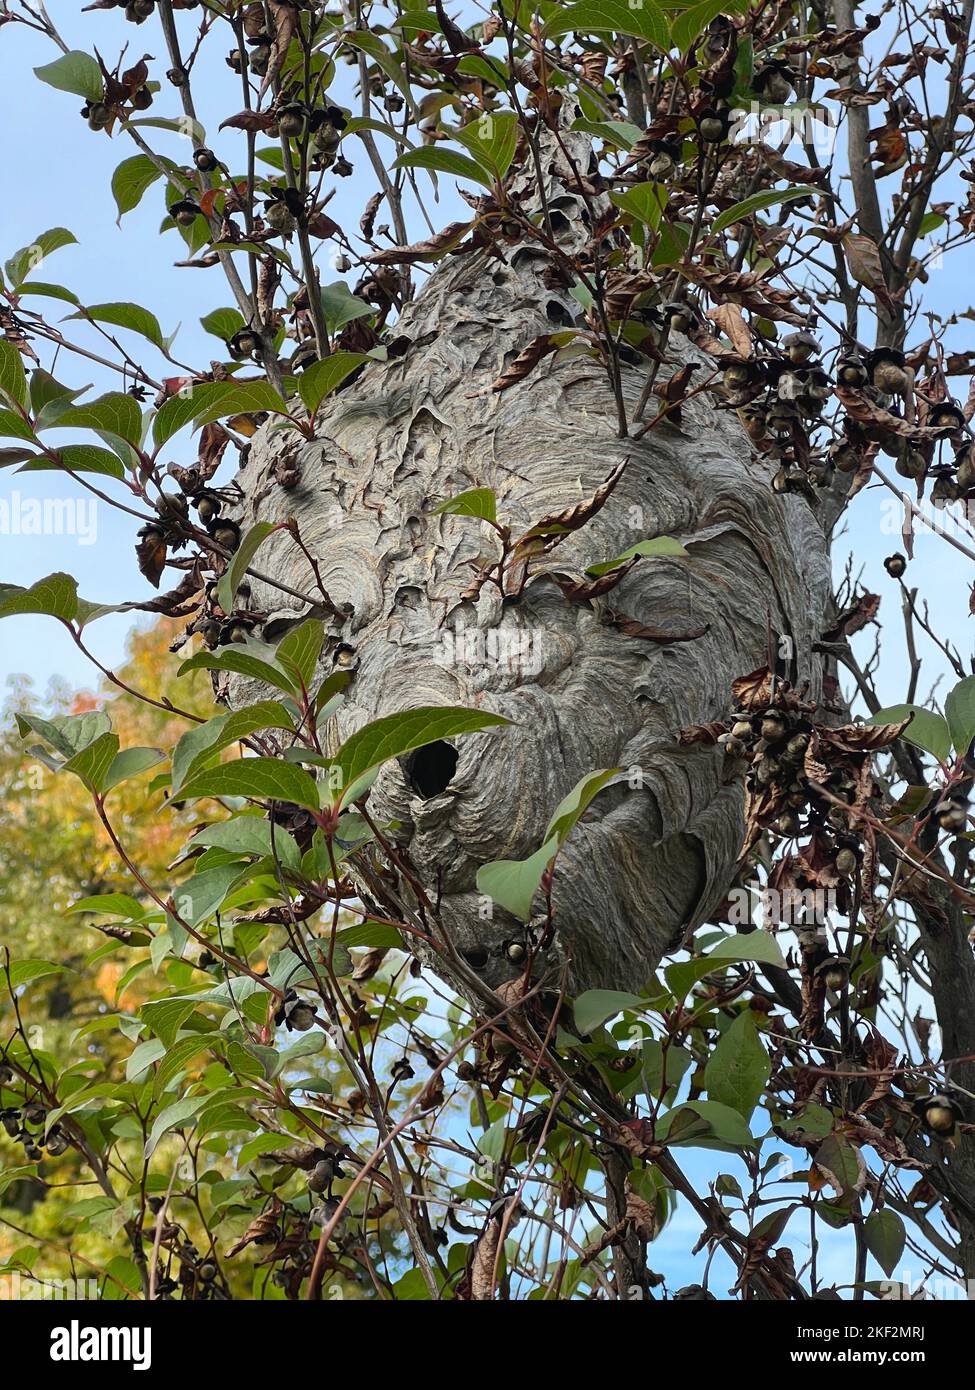 Large Hornet nest with the opening or entrance visible in the branches of a tree in Prospect Park, Brooklyn, New York. Stock Photo